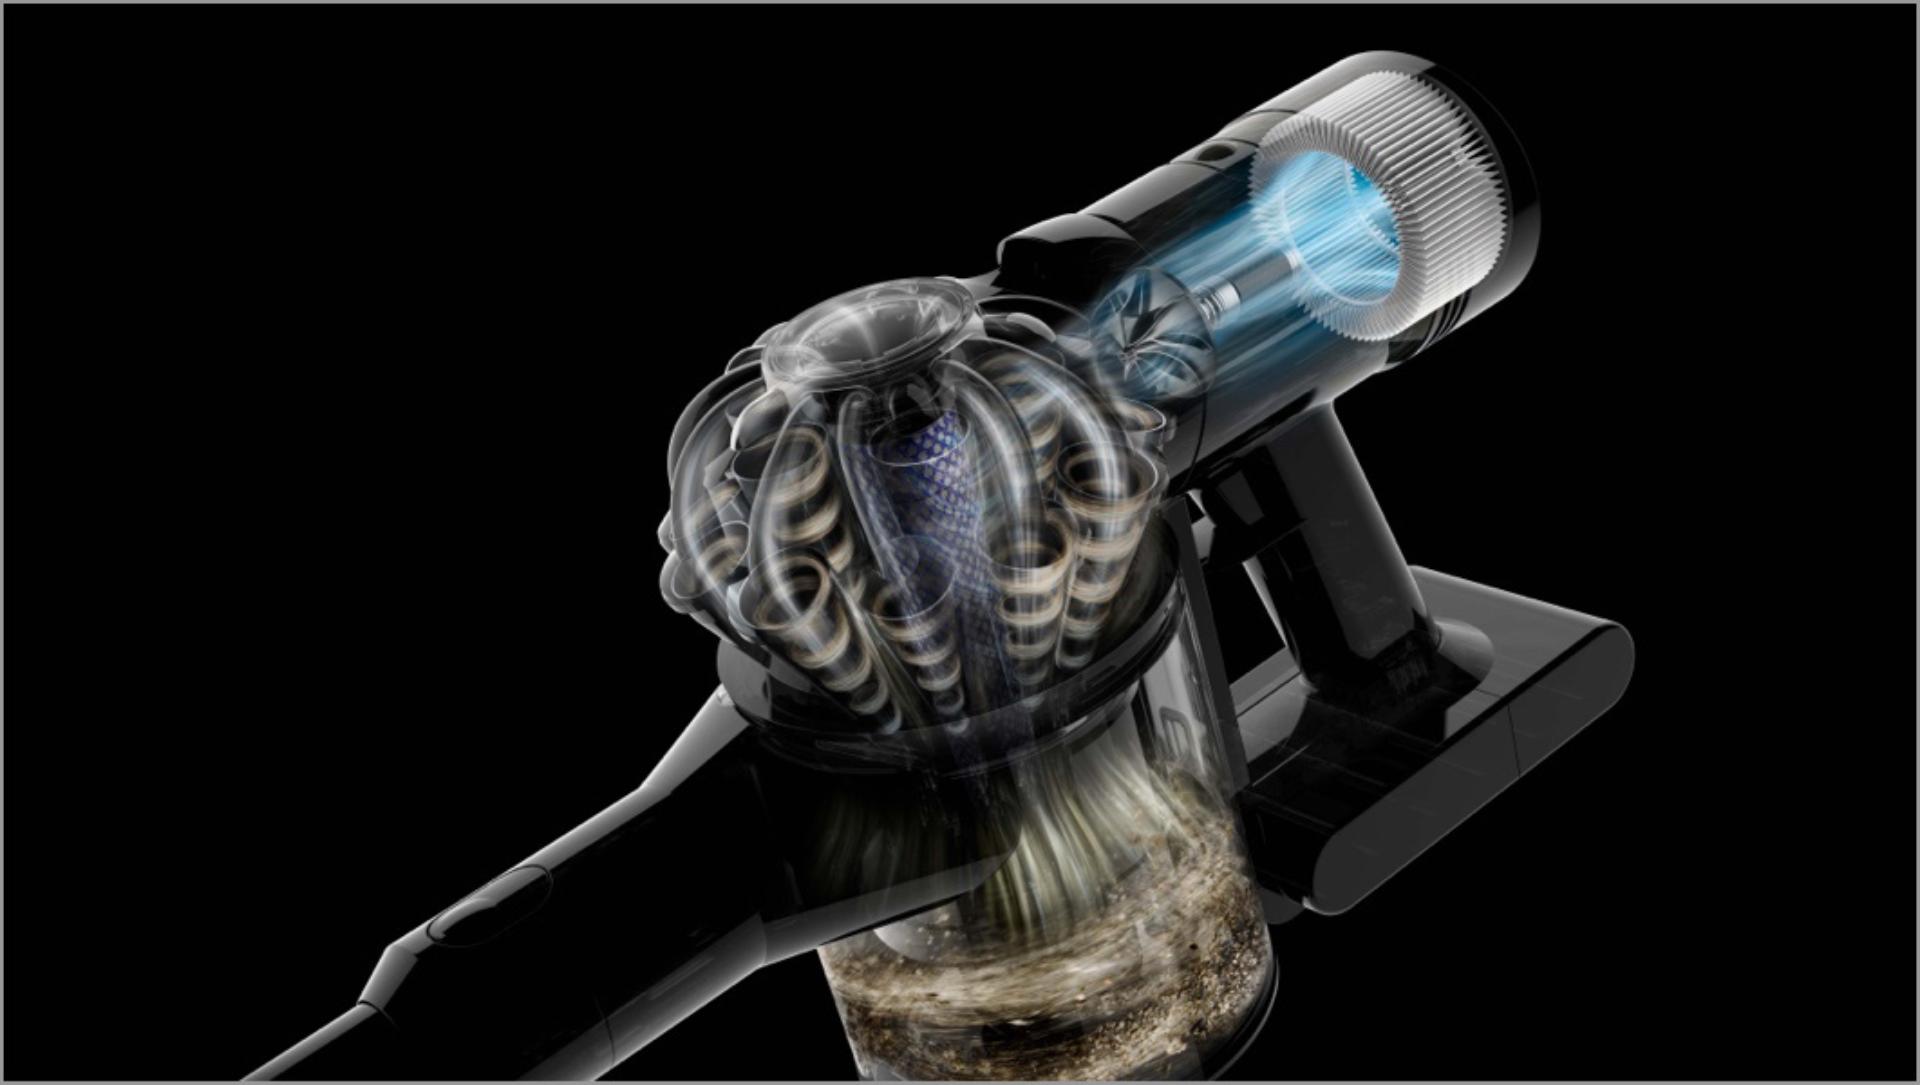 Cutaway of the filtration system of the Dyson V8 vacuum cleaner